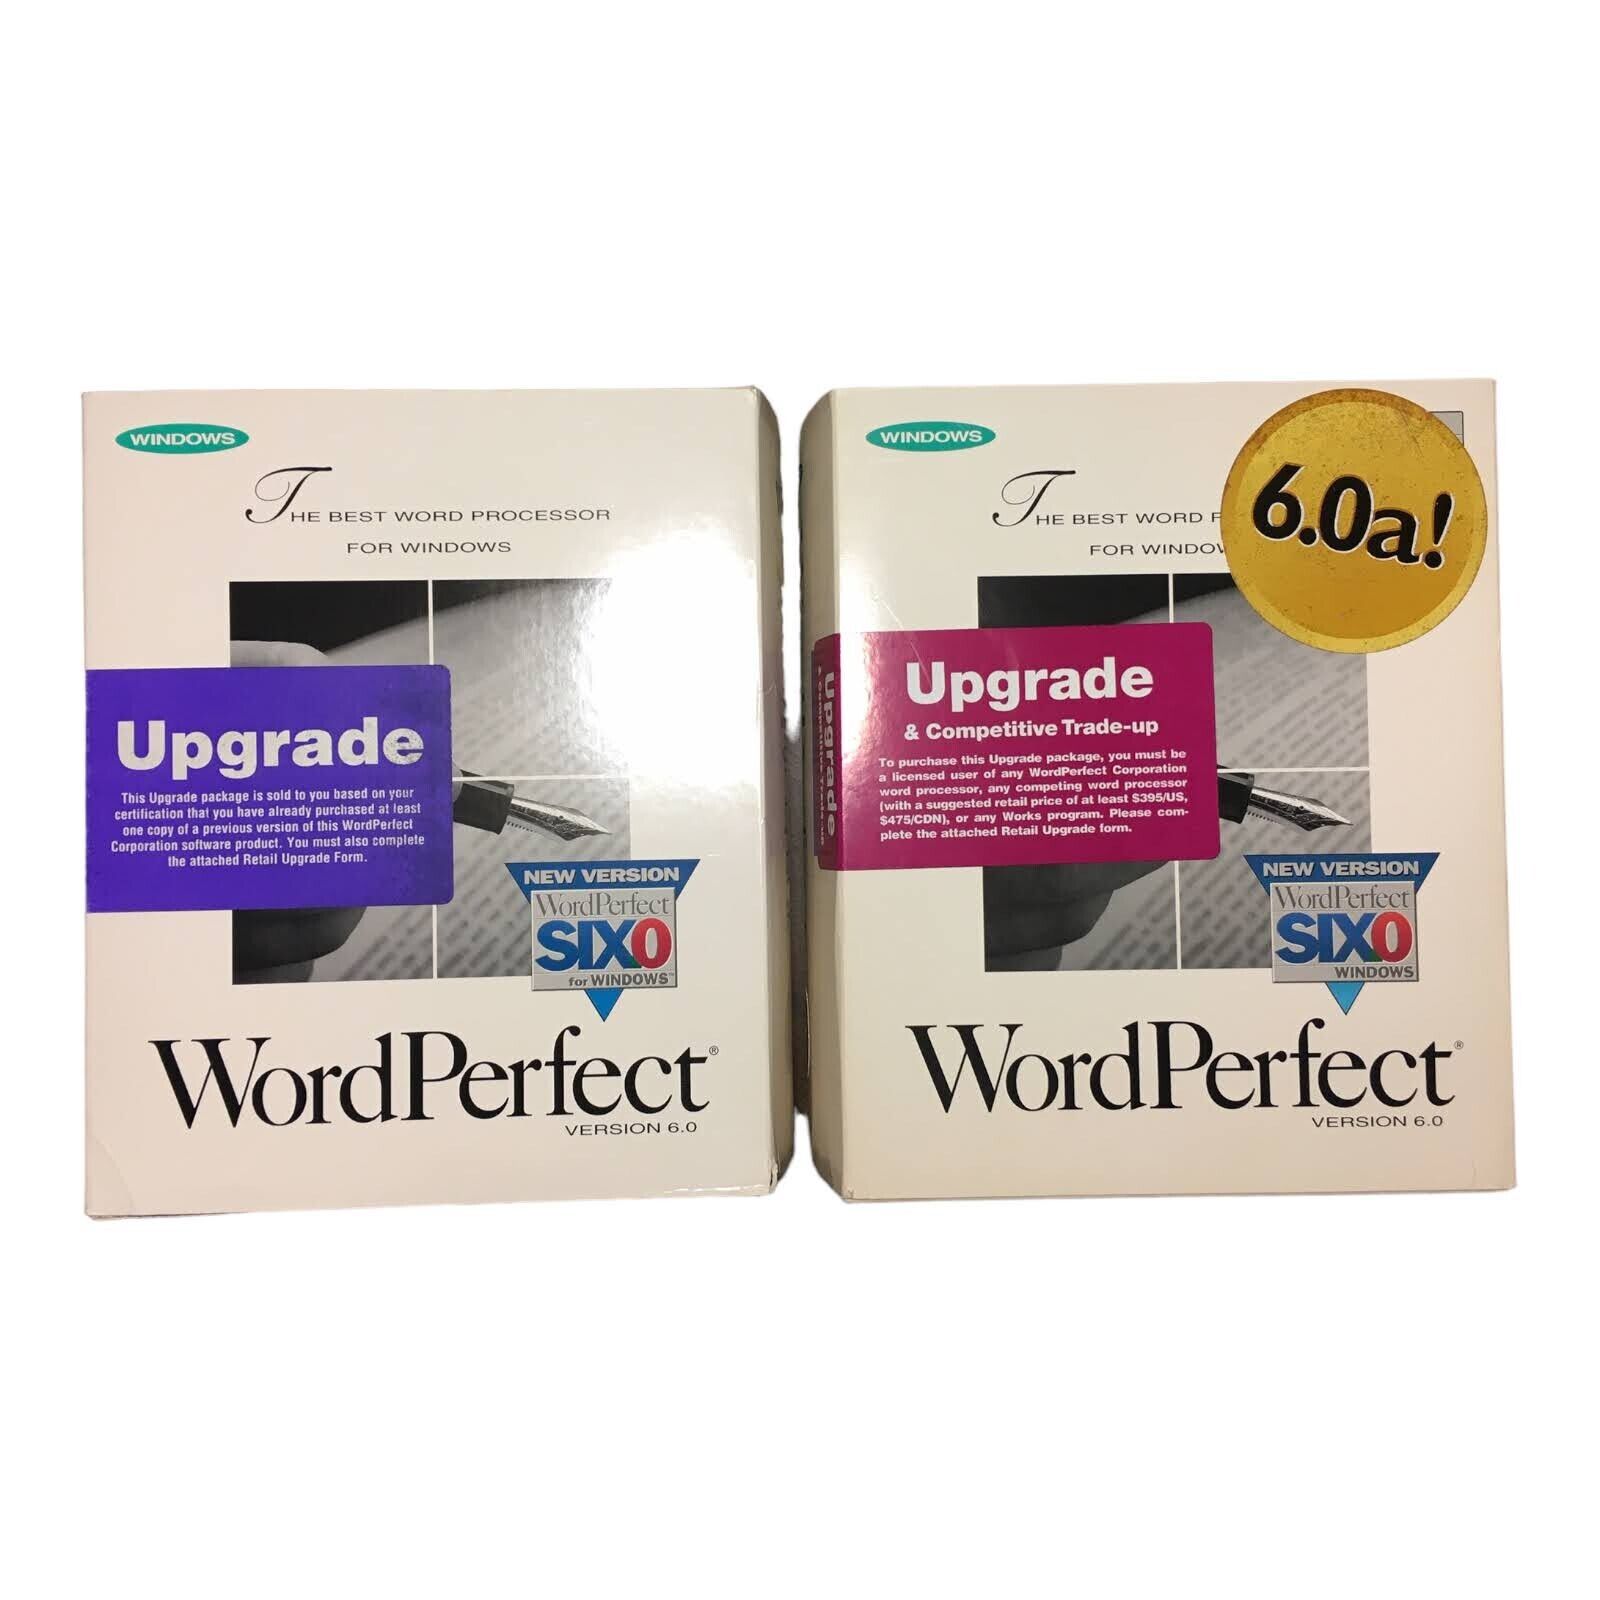 WordPerfect Upgrade Trade-up Version 6.0 & 6.0a For Windows 3.1 Unused Open Box